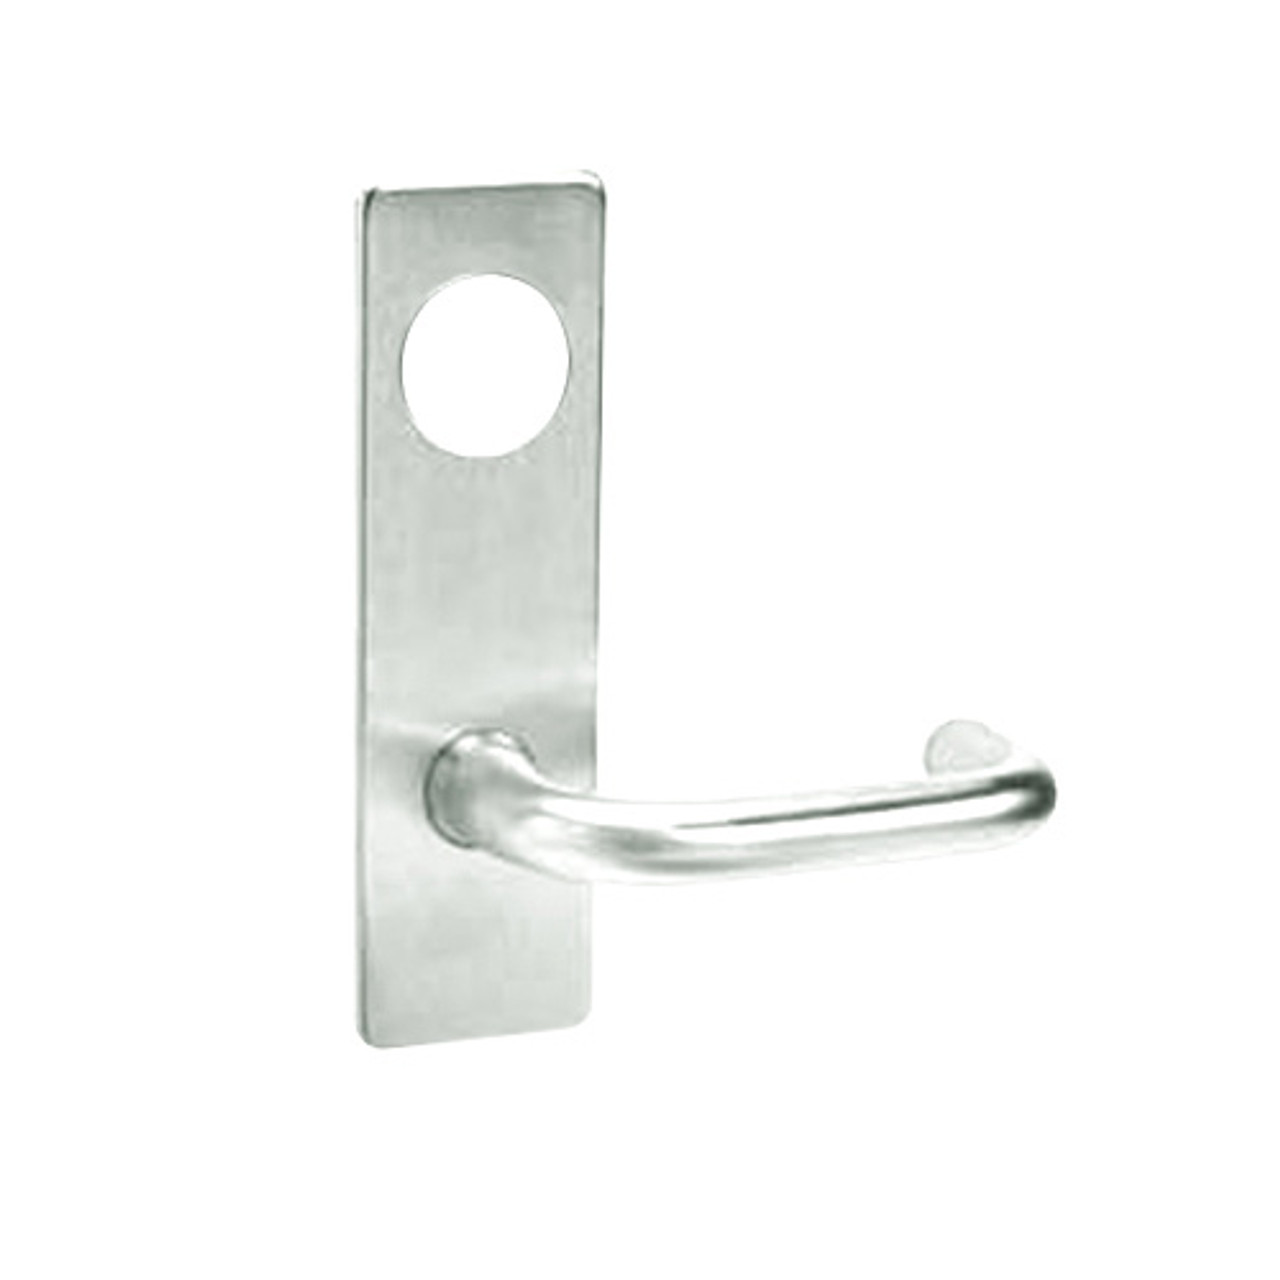 ML2051-LSP-618-M31 Corbin Russwin ML2000 Series Mortise Office Trim Pack with Lustra Lever in Bright Nickel